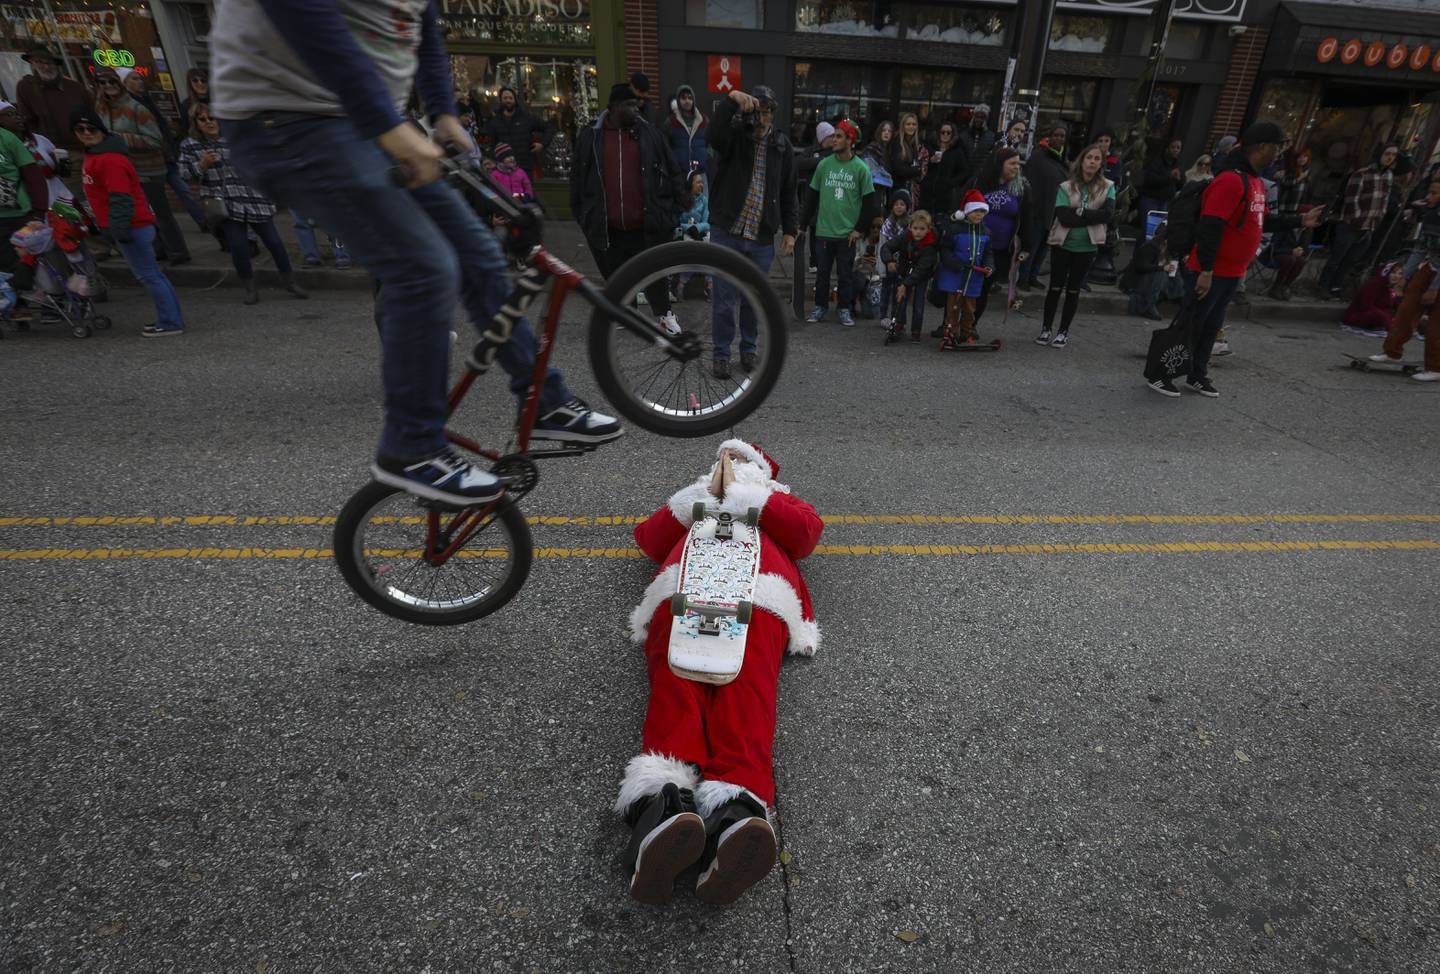 Jimmy Pelletier, from DC Wheels Charity, wows the crowds with skateboard moves at Hampden's Annual Holiday Parade on December 4, 2022.